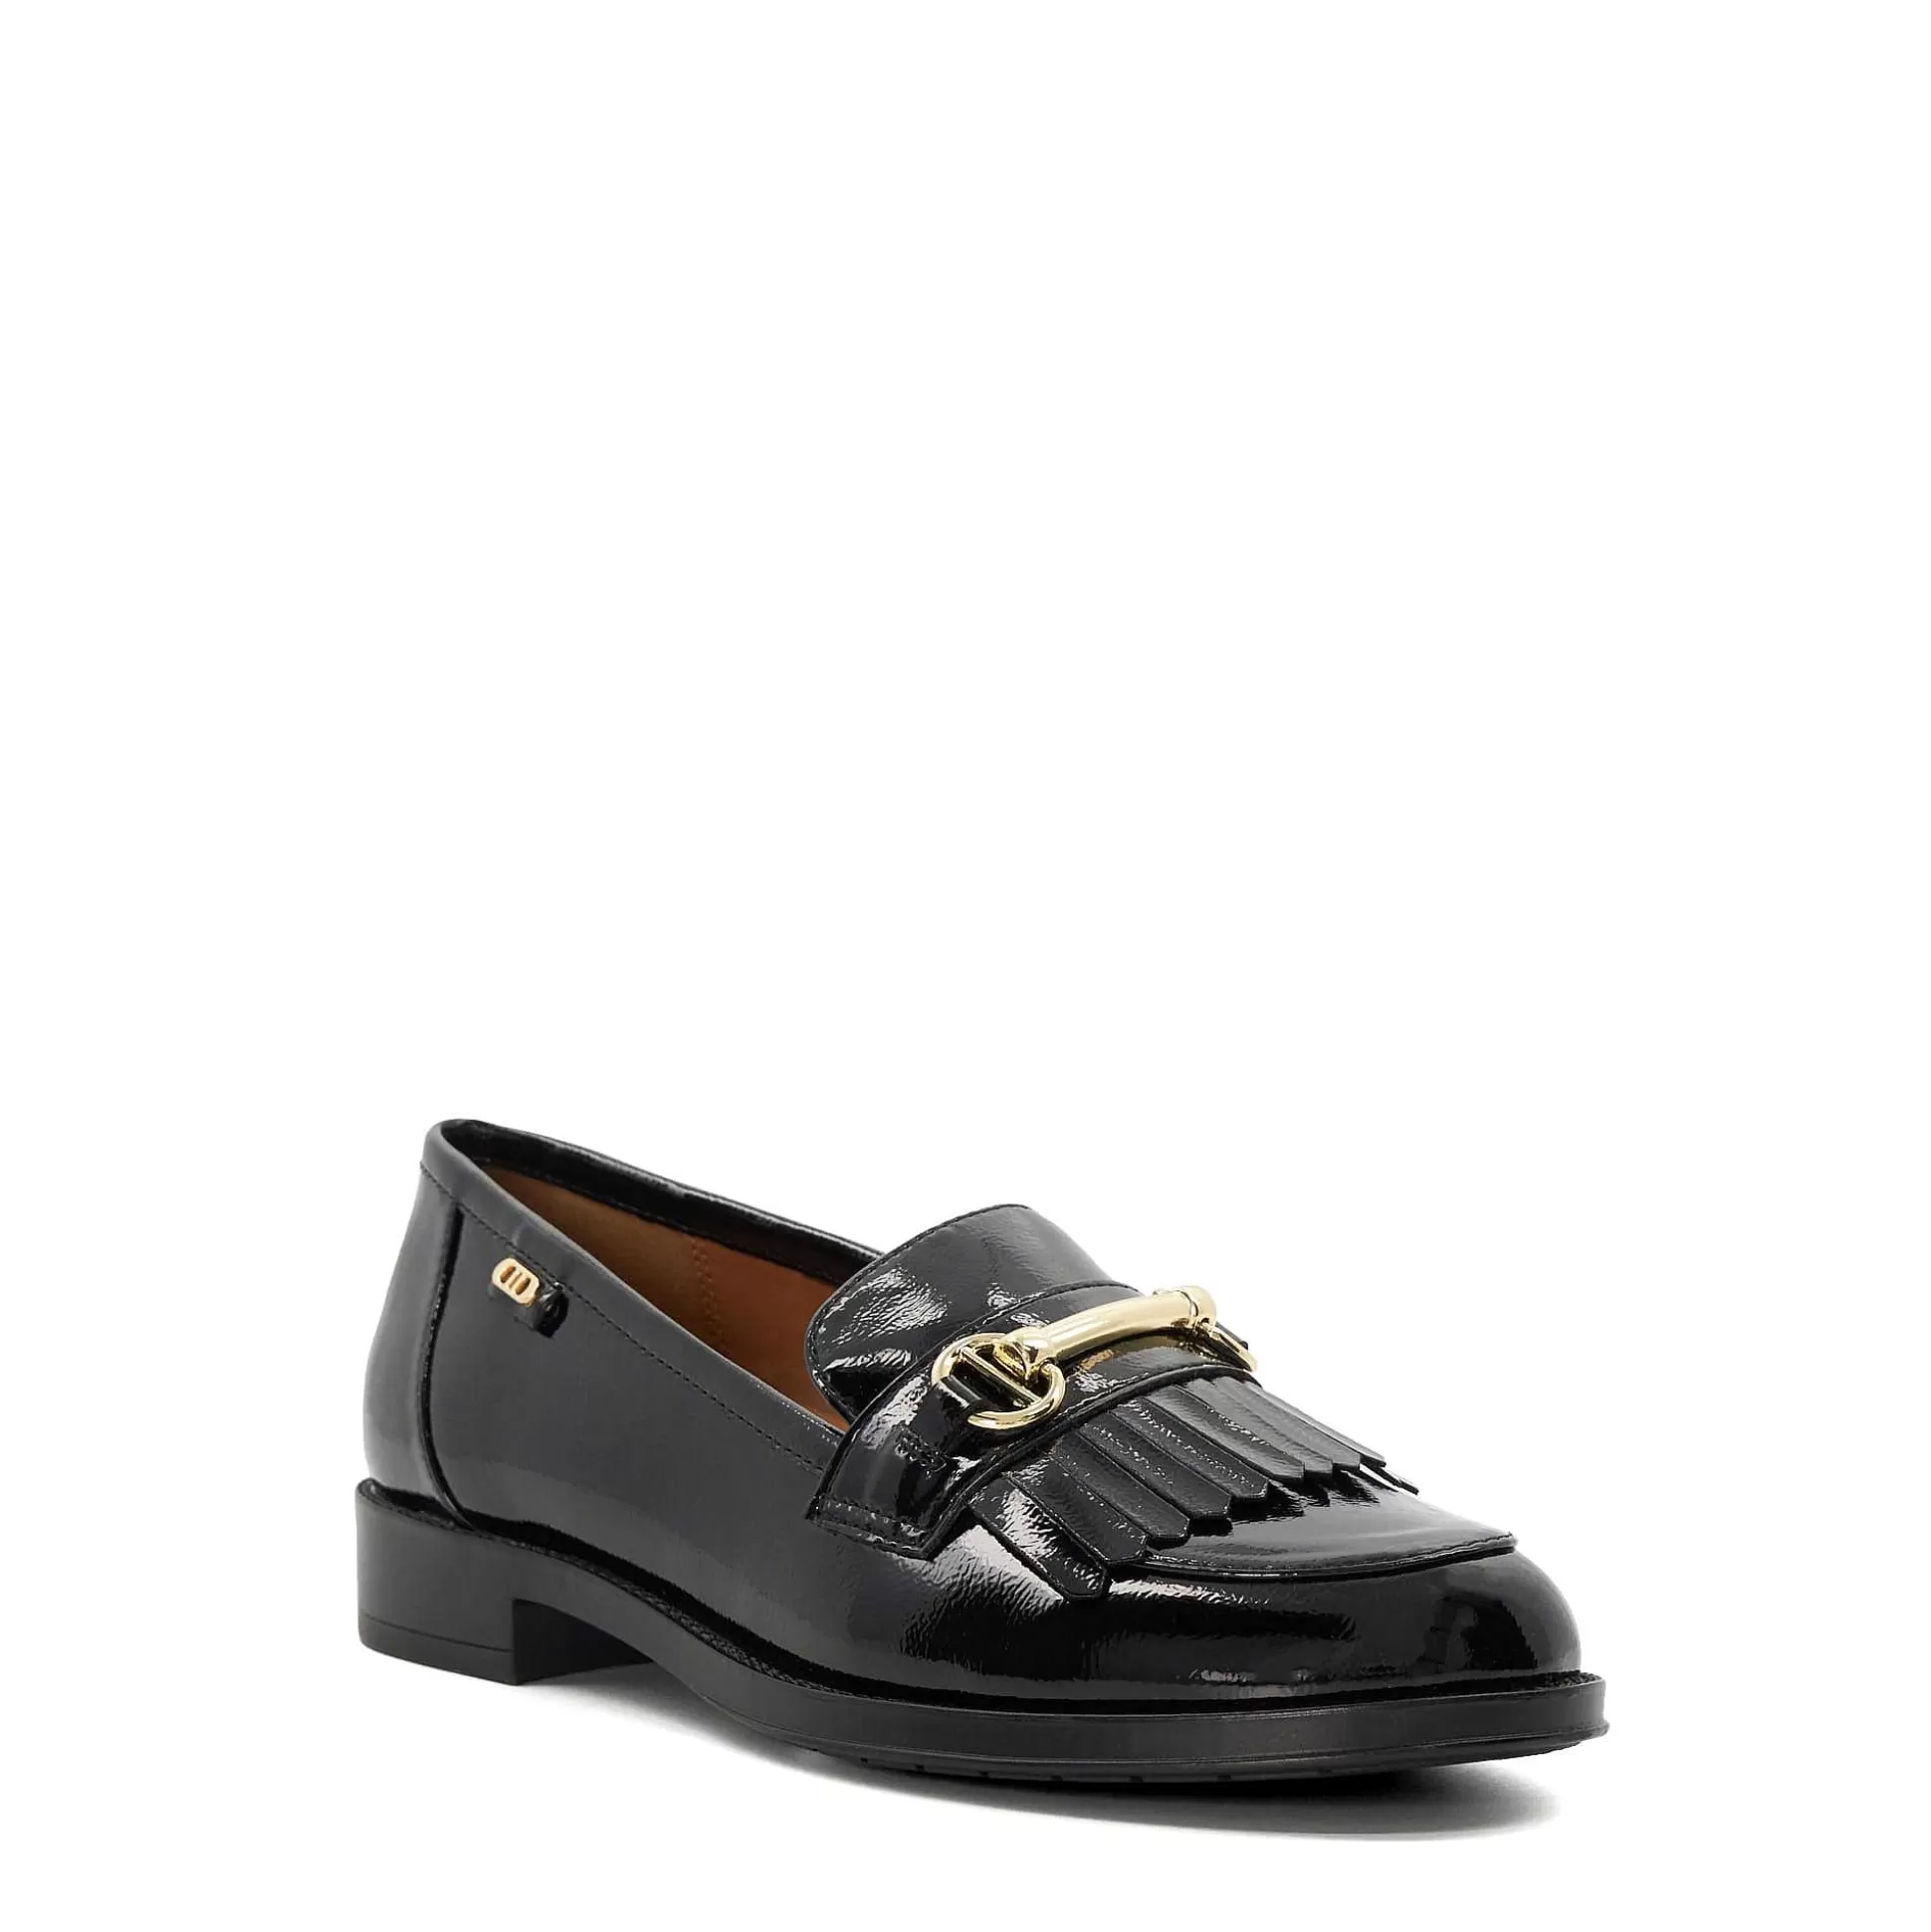 Dune London GESTURES - BLACK-Women Flat Shoes | Loafers